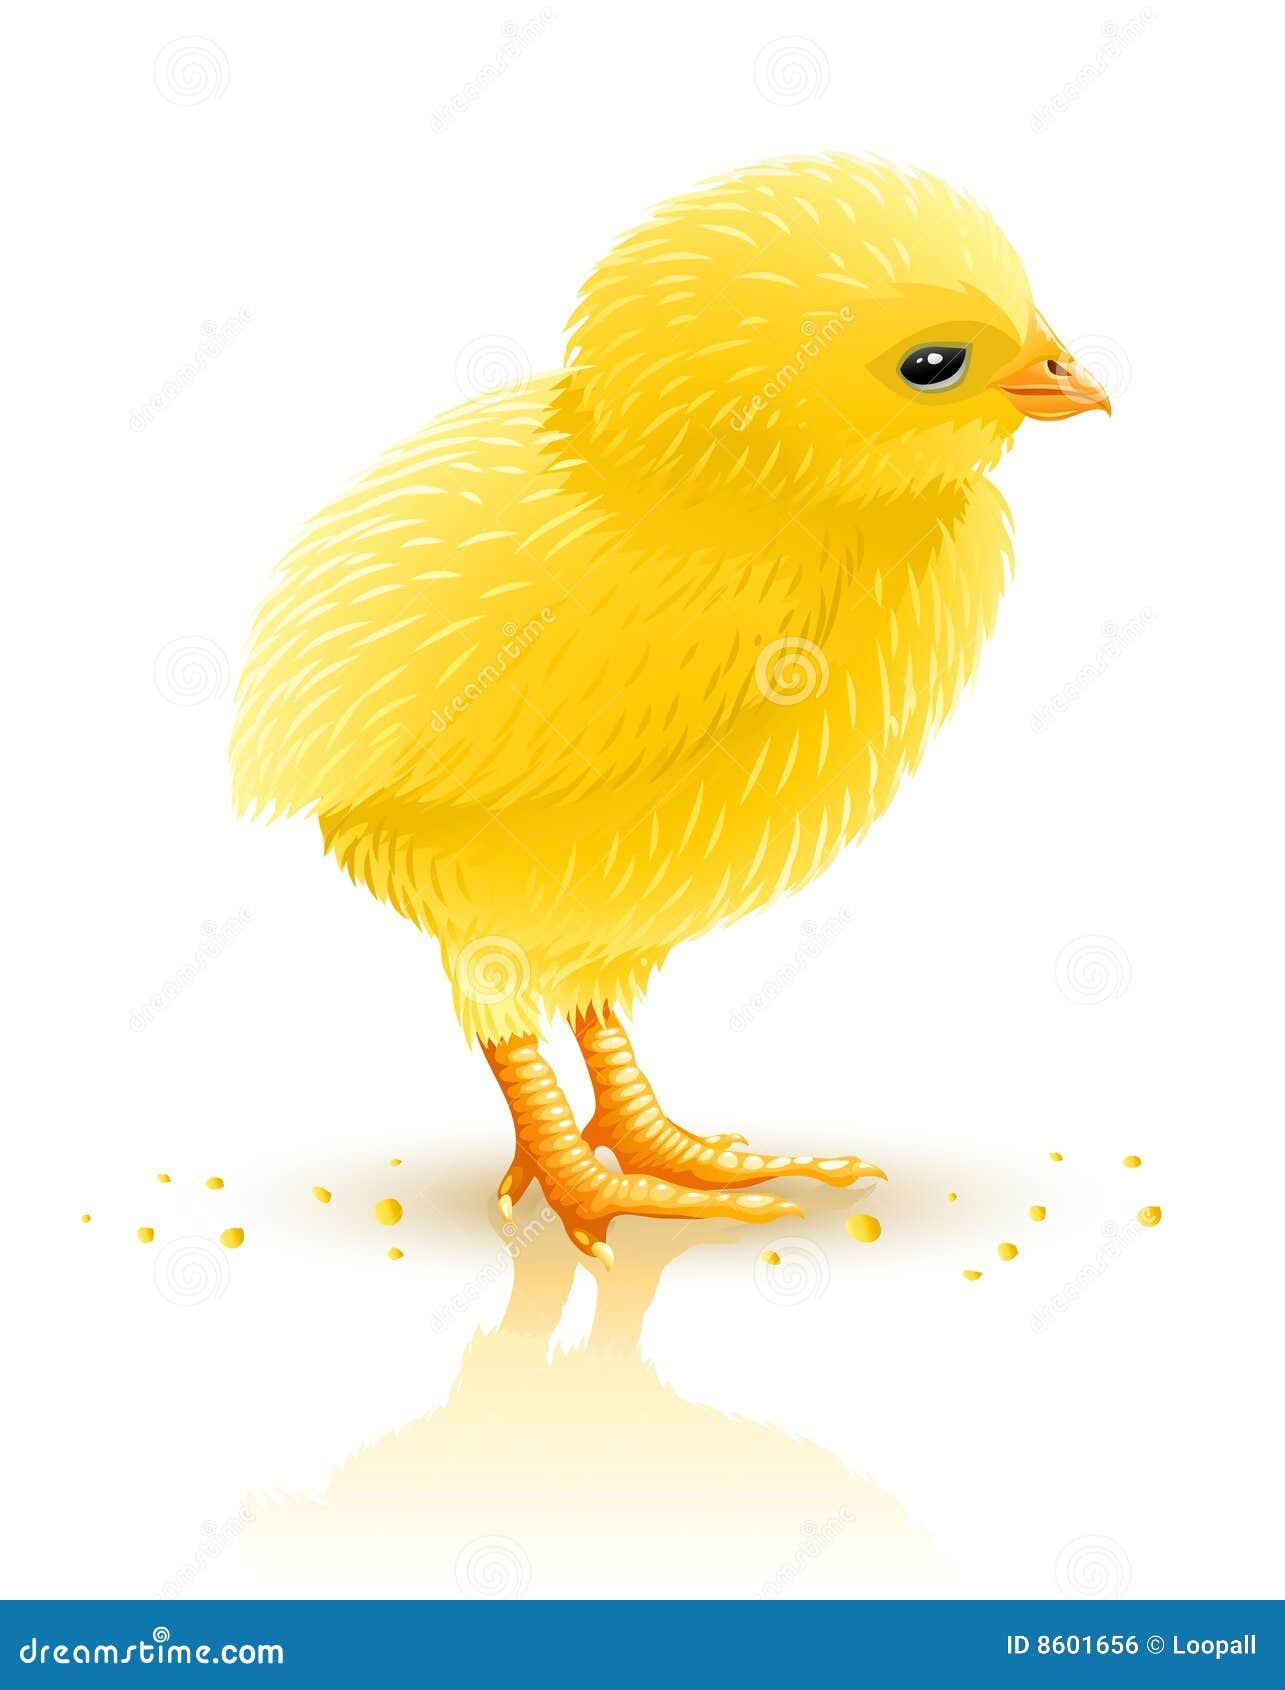 clipart yellow chick - photo #29